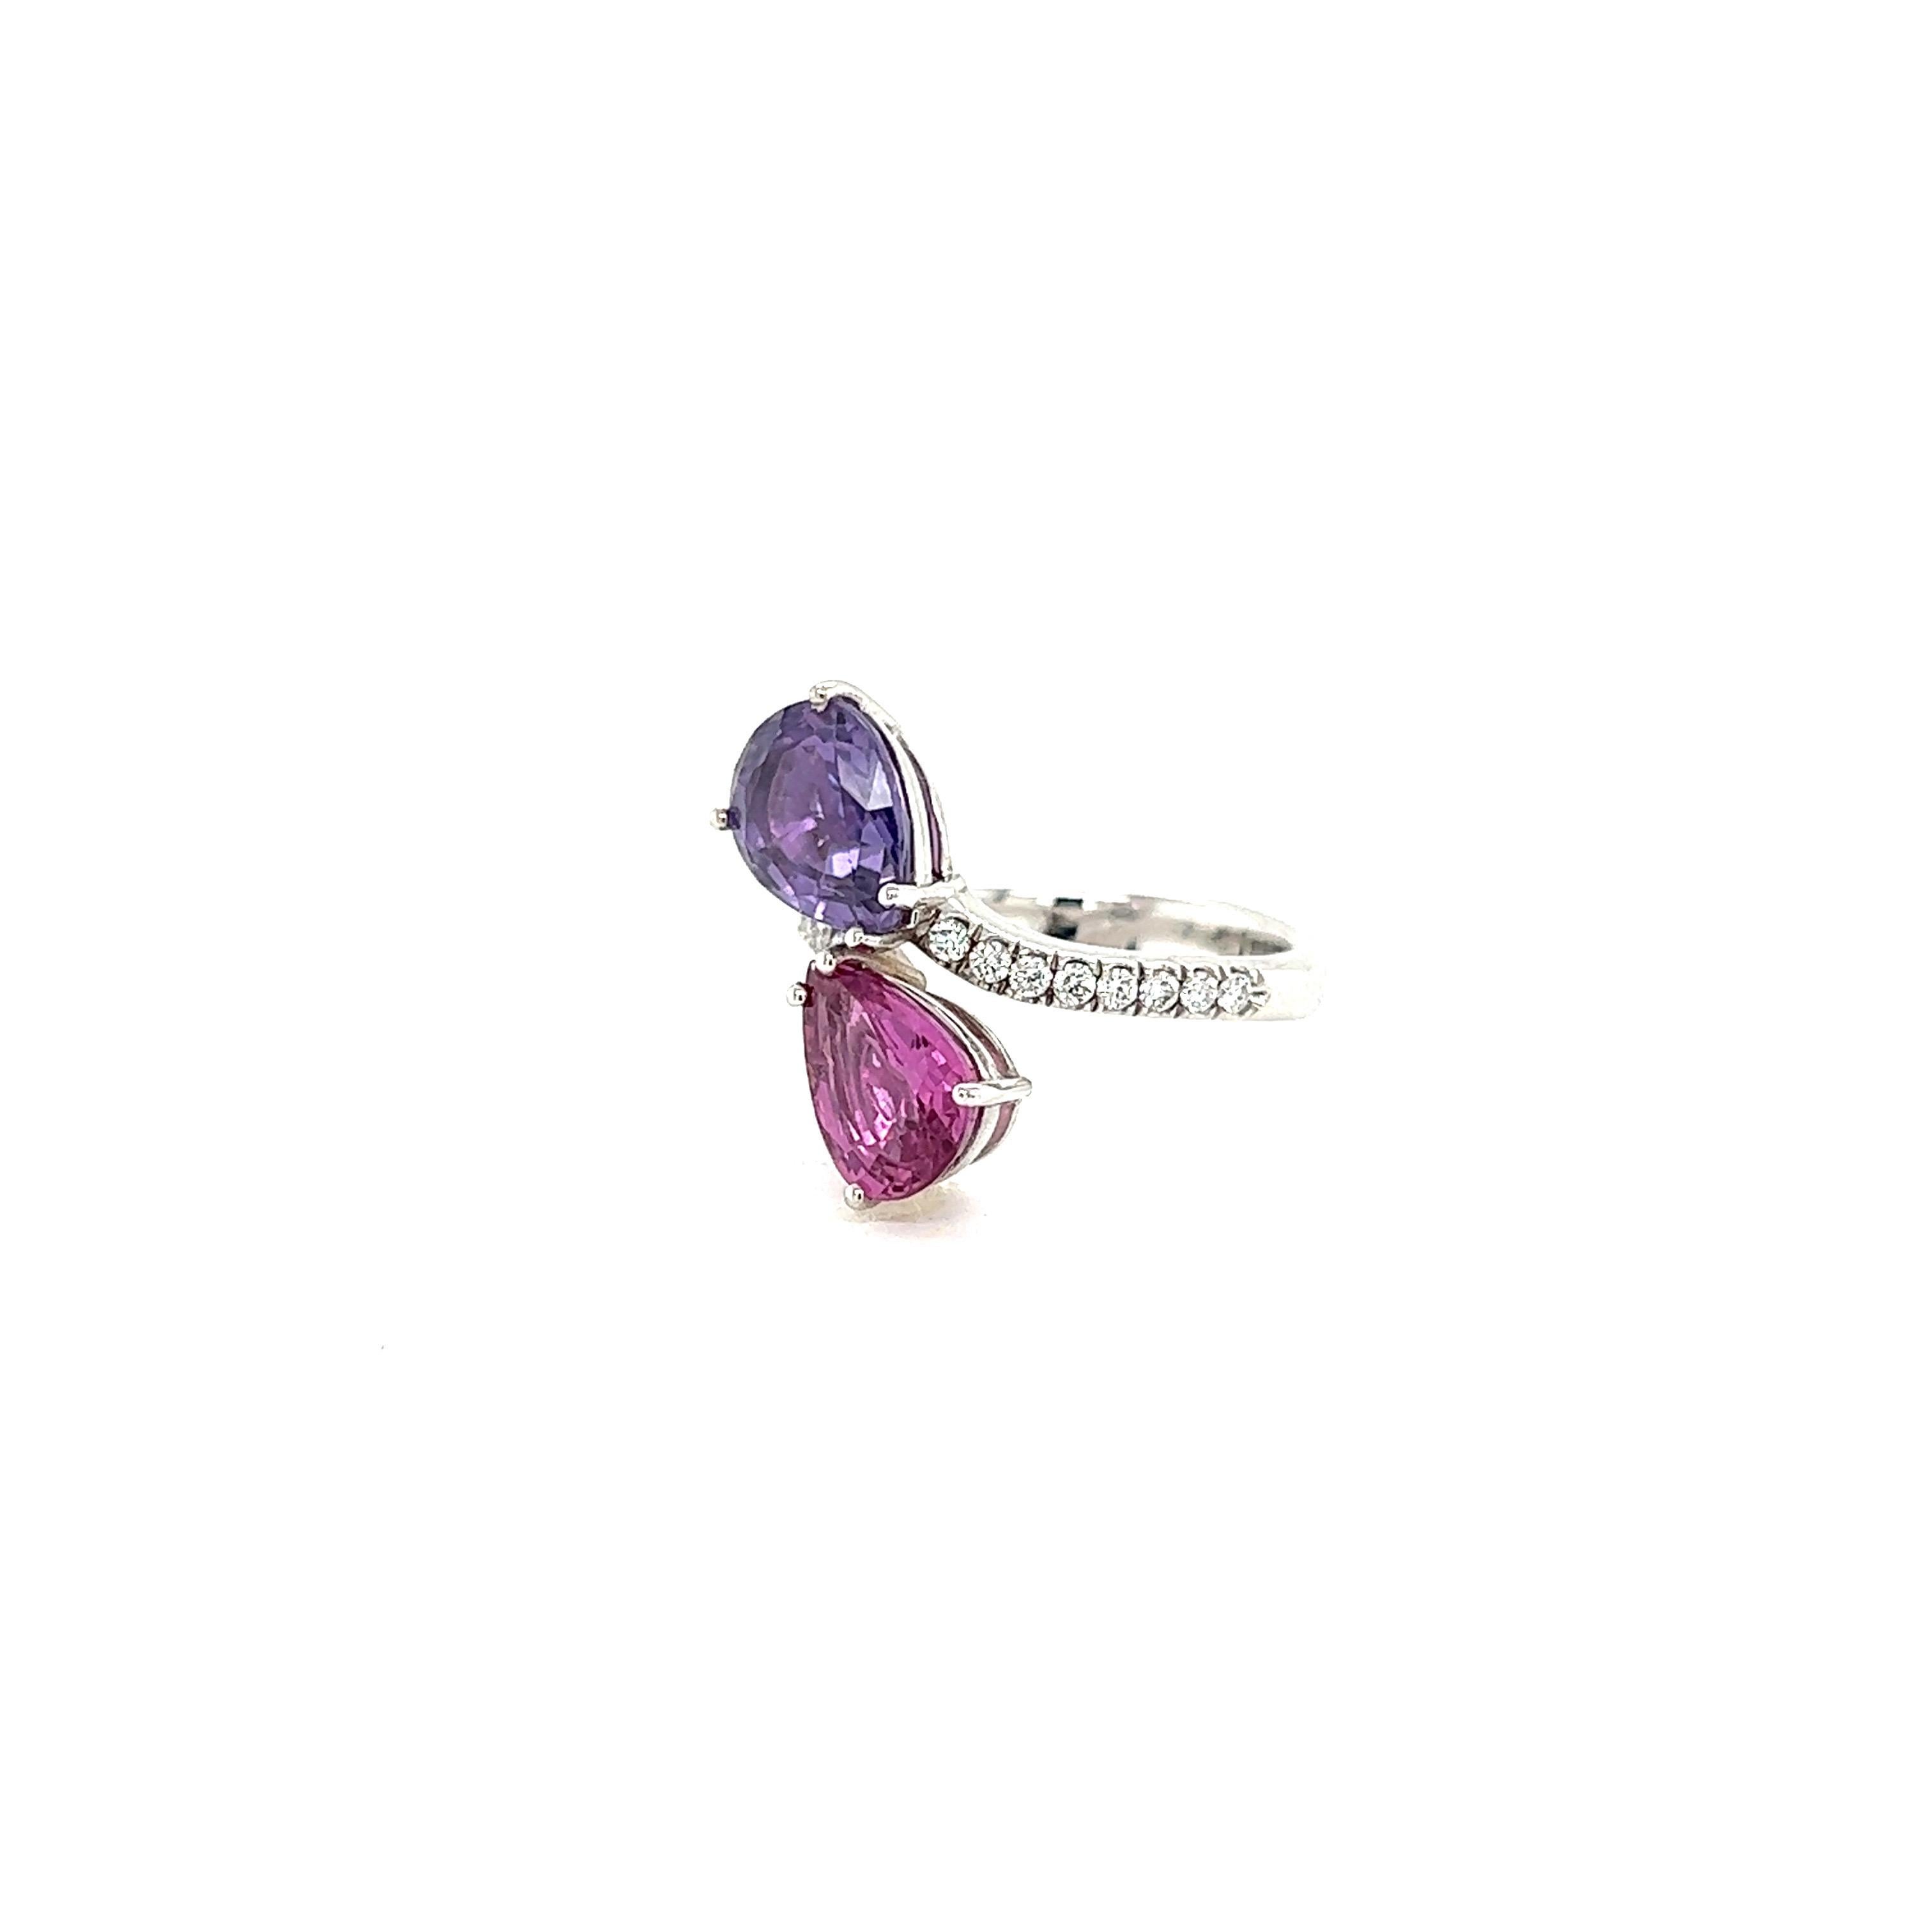 French Ring Two Sapphire Corundum Violet Pink Diamonds White Gold 18 Karat In New Condition For Sale In Vannes, FR